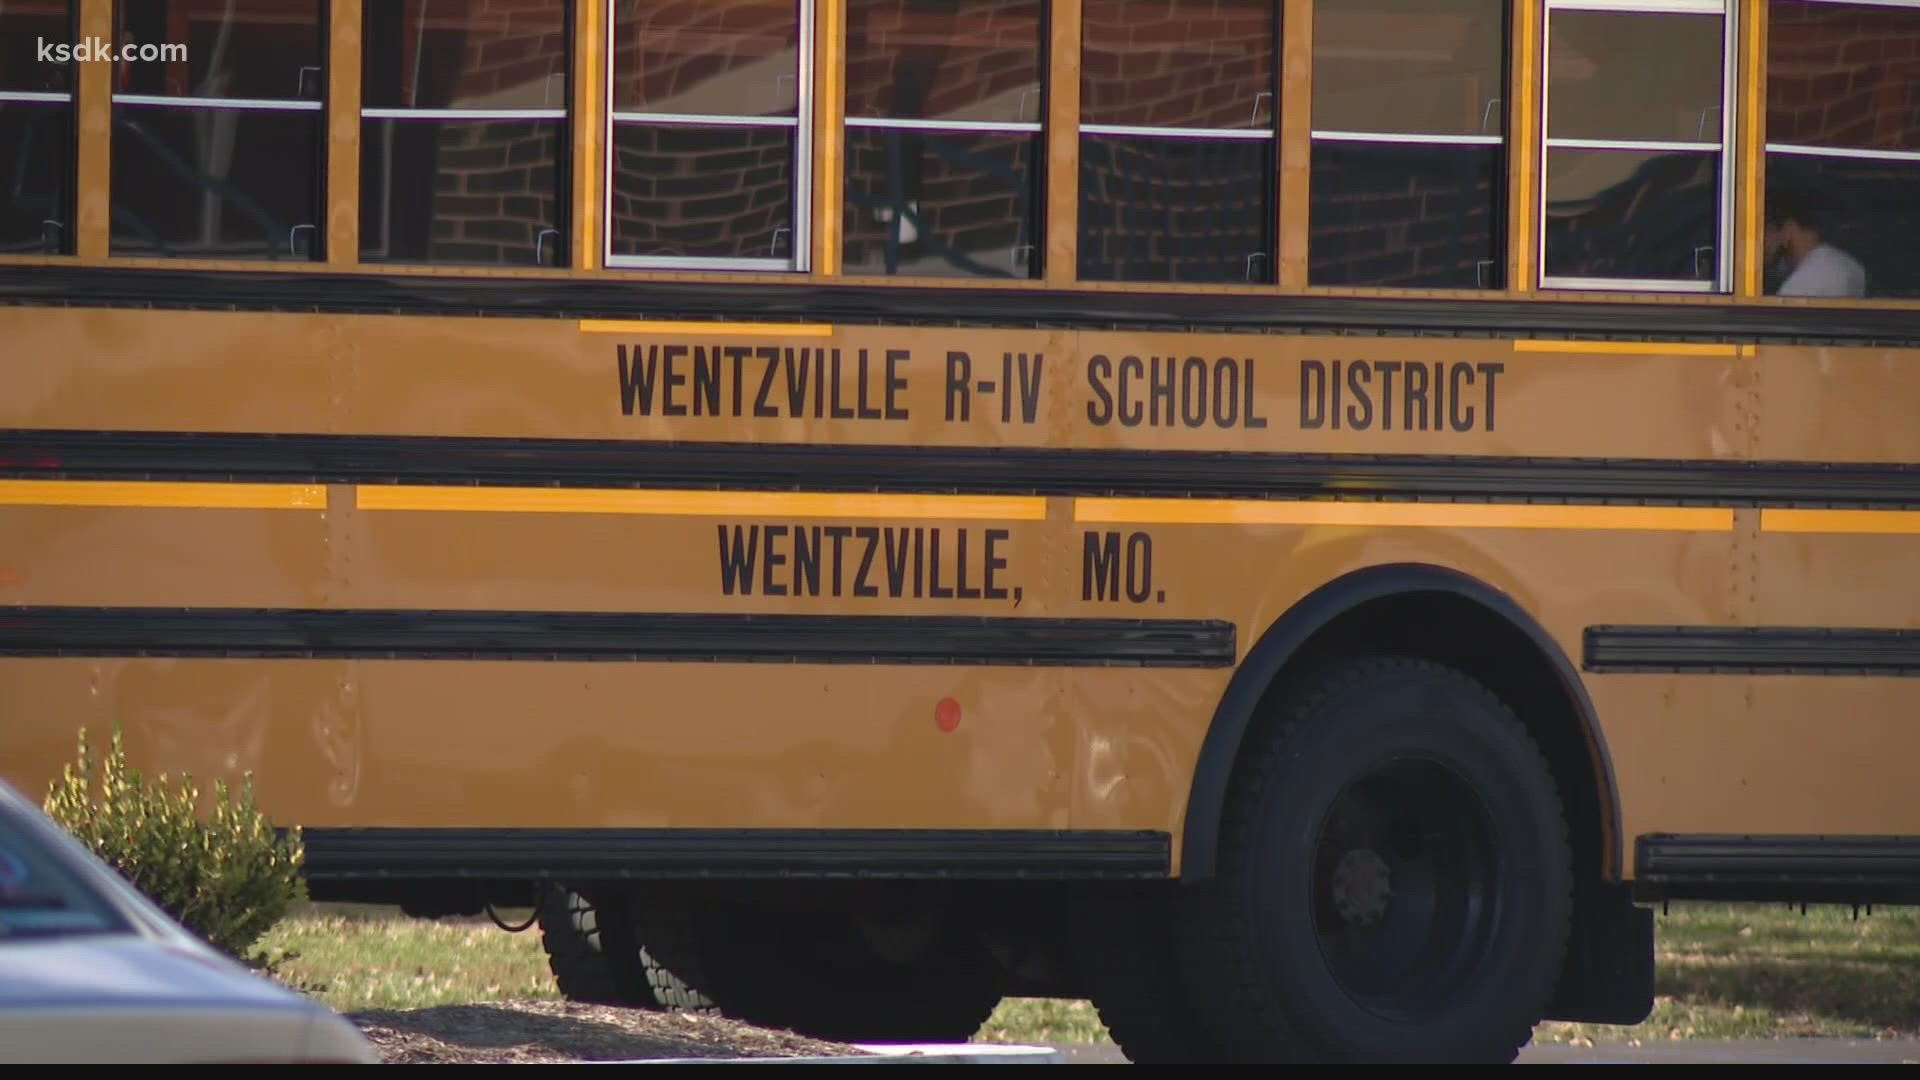 The lawsuit alleges the district's negligence led to a student with autism being raped. The suit says she was raped twice during school hours since September 2020.